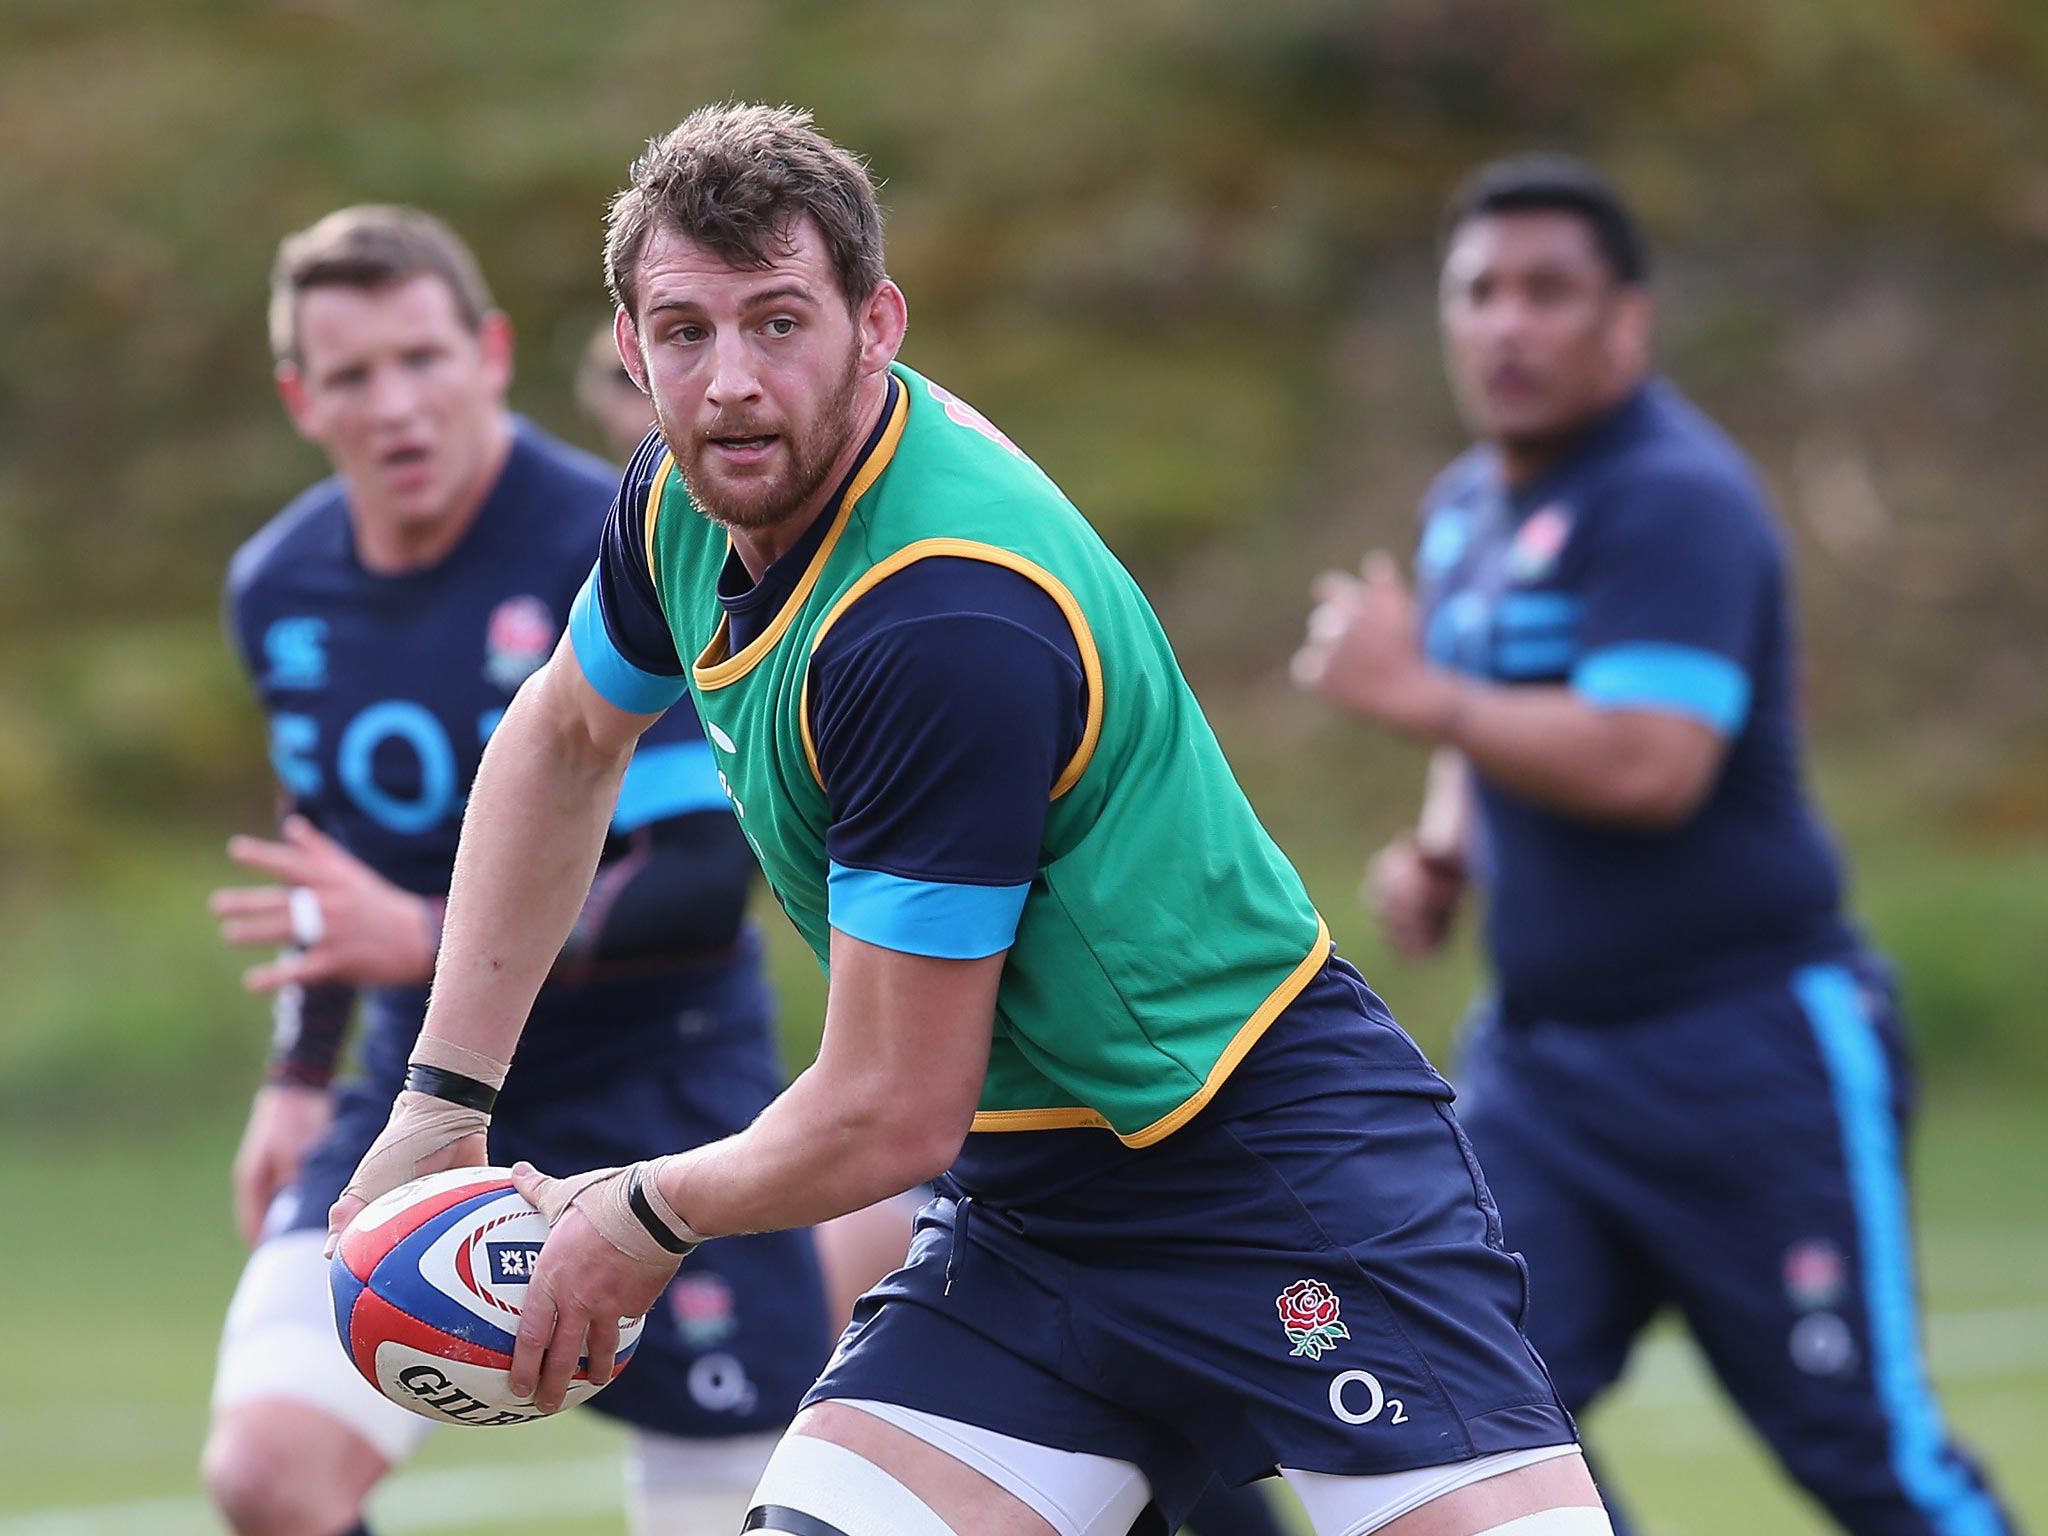 Tom Wood in training with England ahead of this weekend’s Six Nations confrontation with Wales at Twickenham